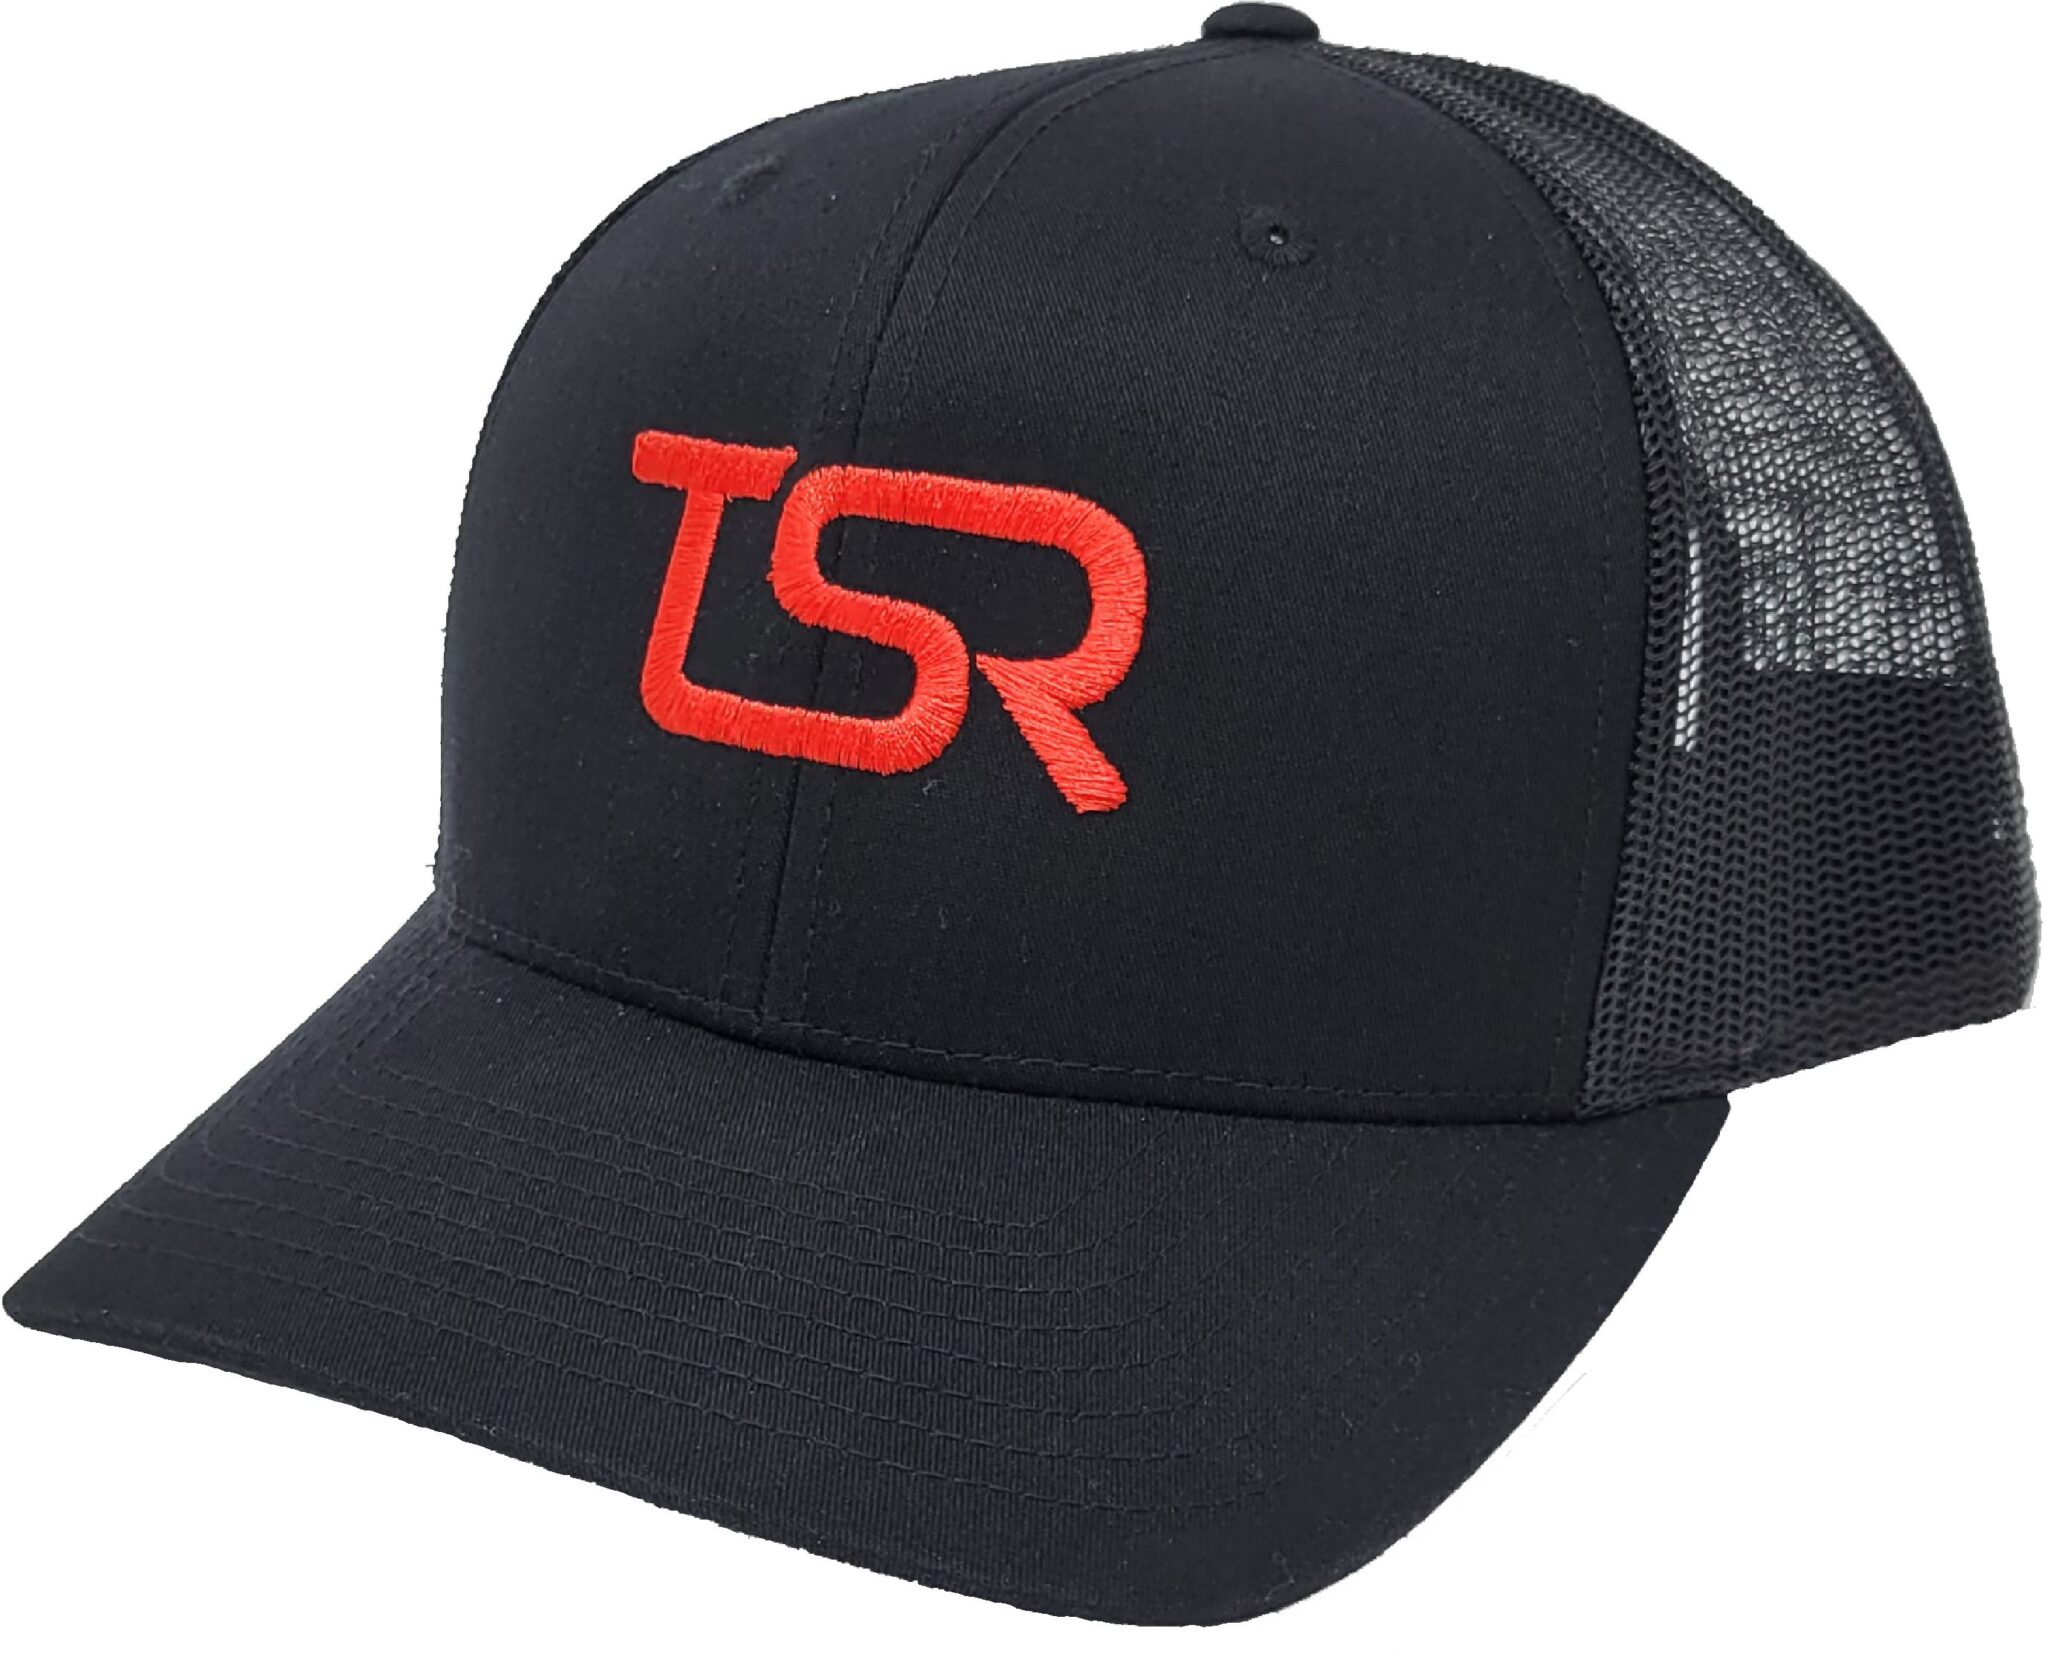 Boater hat |TSR Smooth Cap | The Starboard Rail | Adjustable